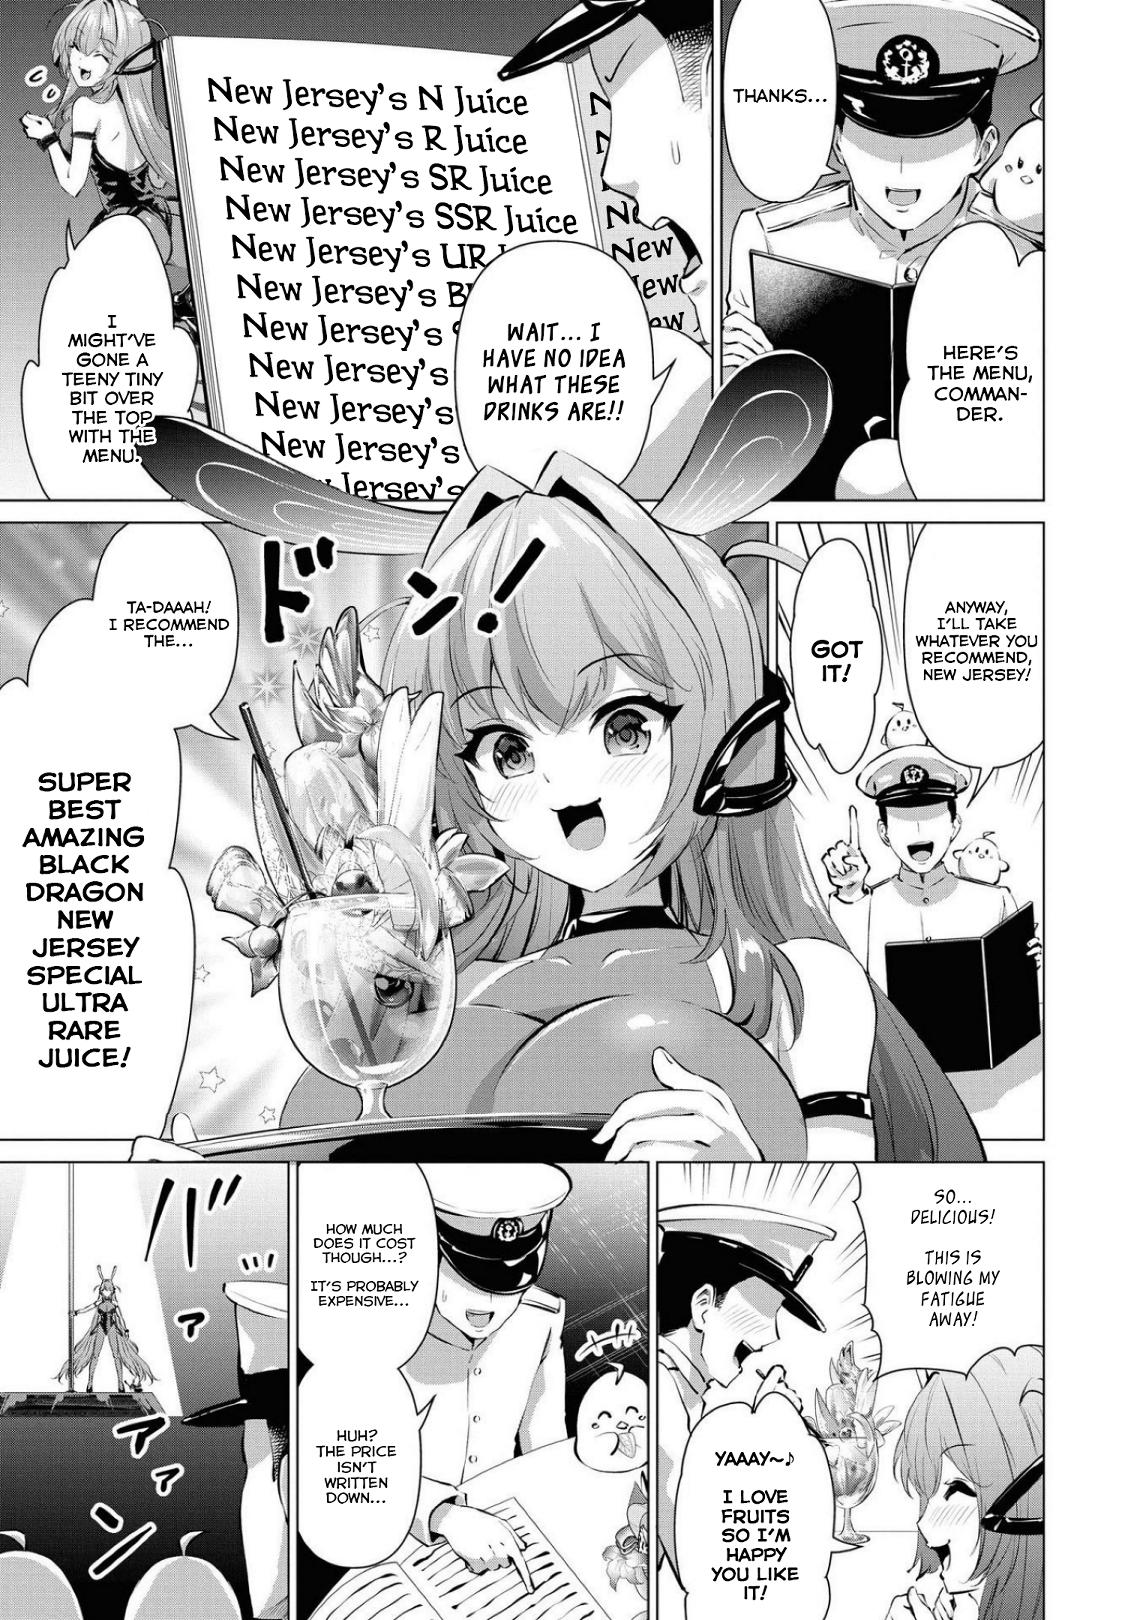 Azur Lane Comic Anthology Breaking!! Vol.5 Chapter 56: New Jersey's Over-The-Top Hospitality page 9 - Mangakakalot